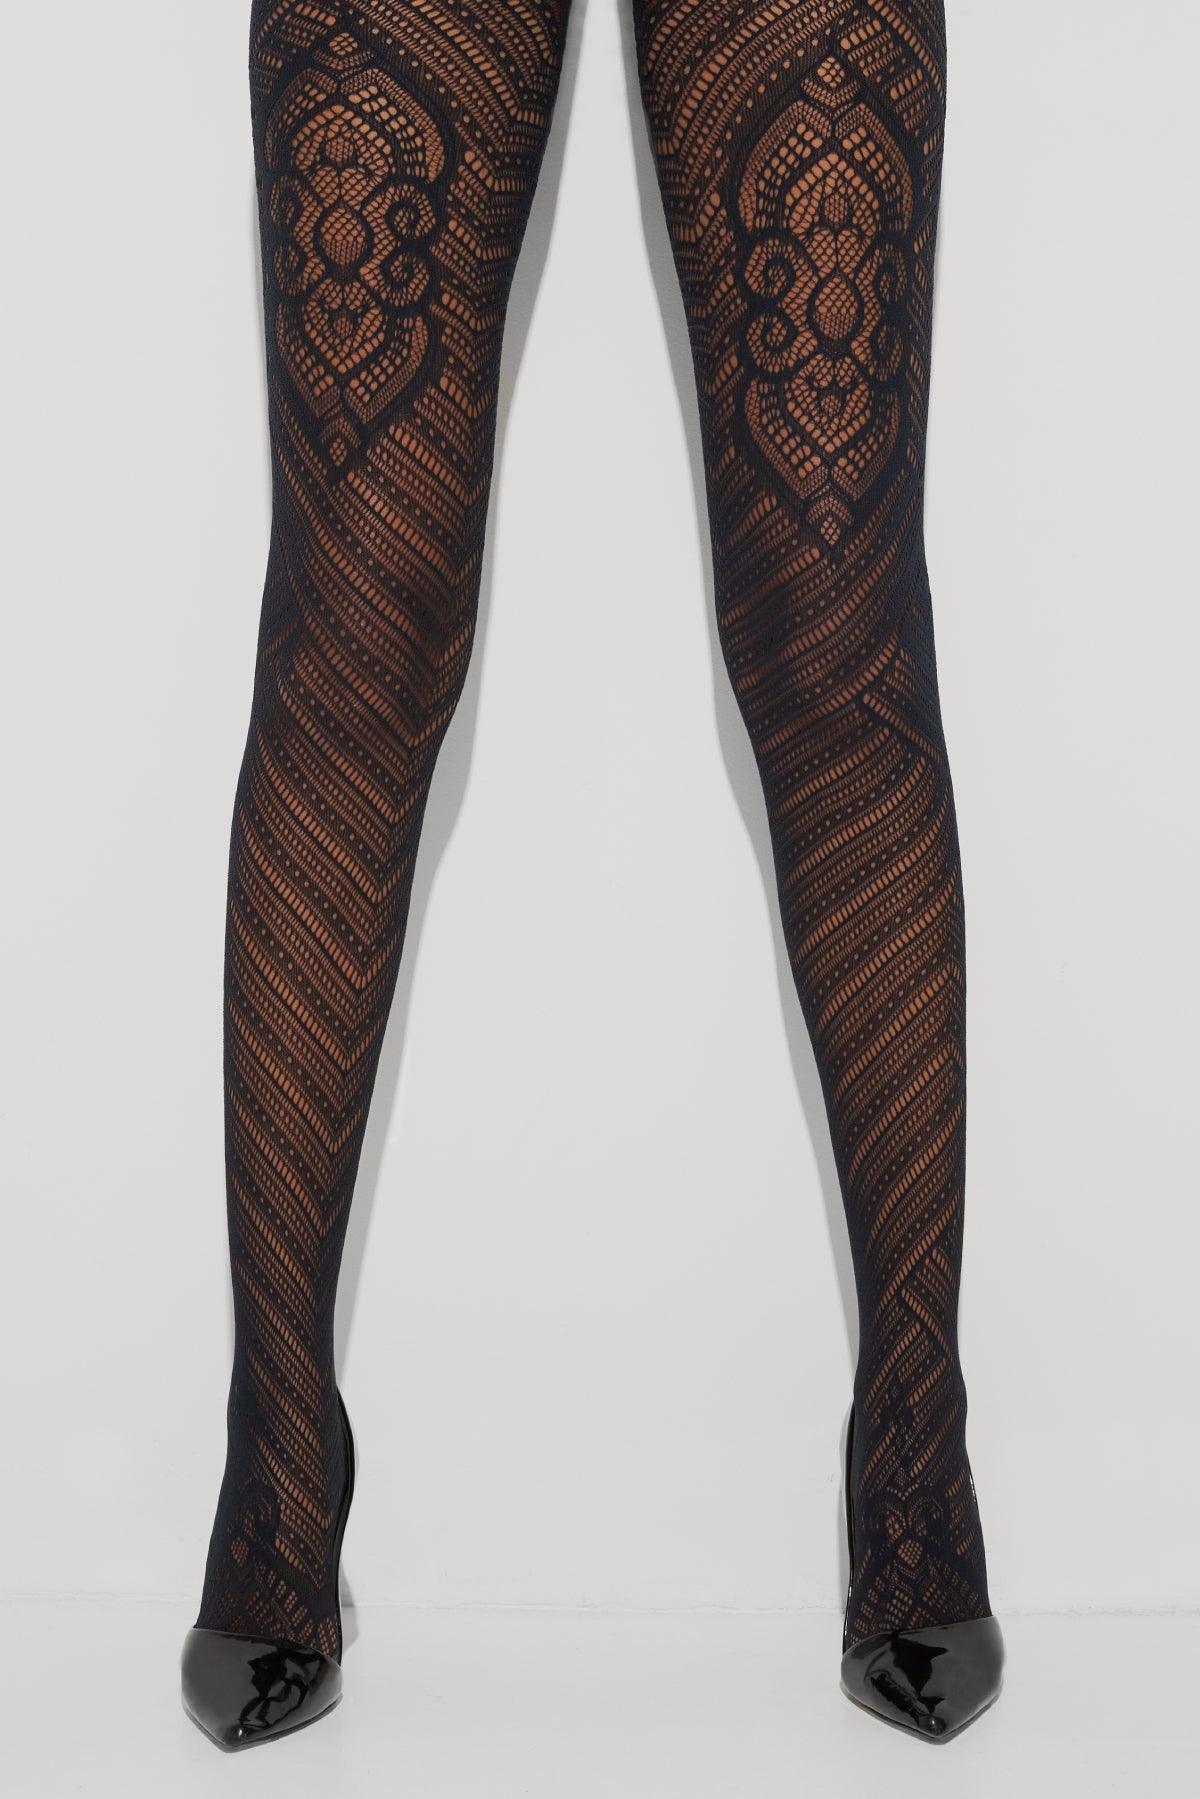 Floral Lace Tights - MARIEMUR